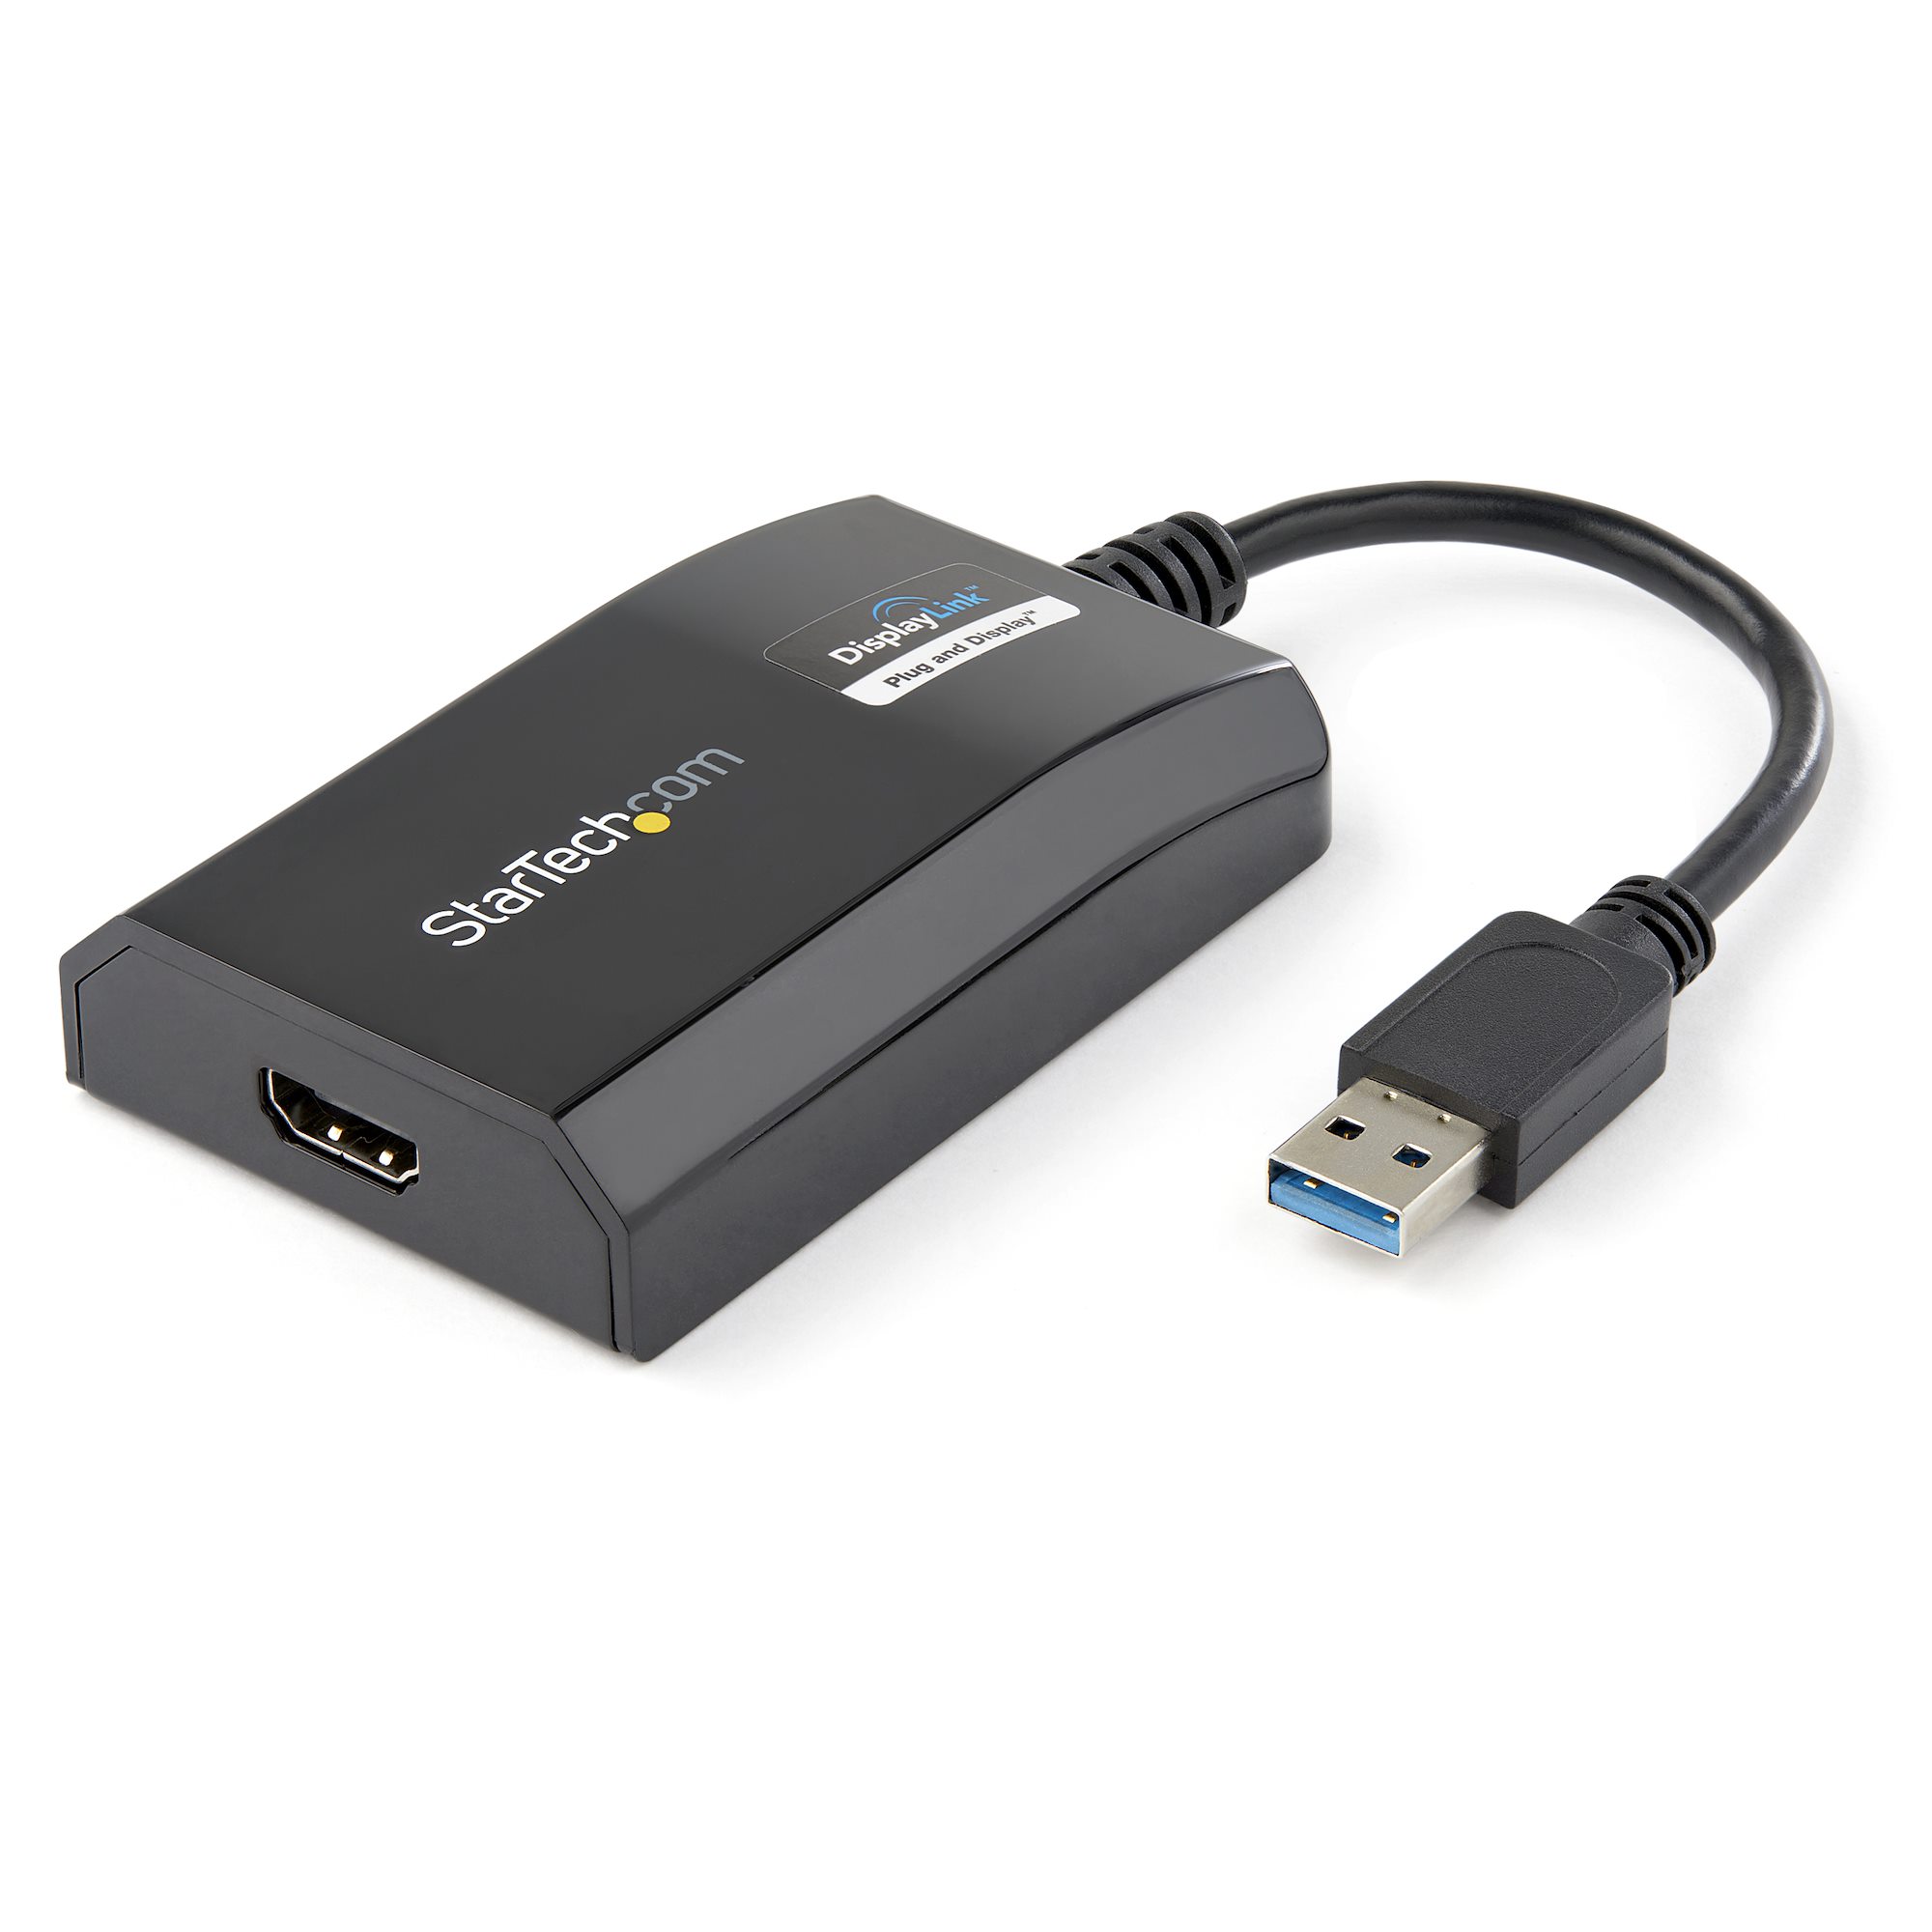 HDMI to USB 3.0 Adapter 1280P HD Video Capture Device 5Gbps for MAC Linux WIN US 